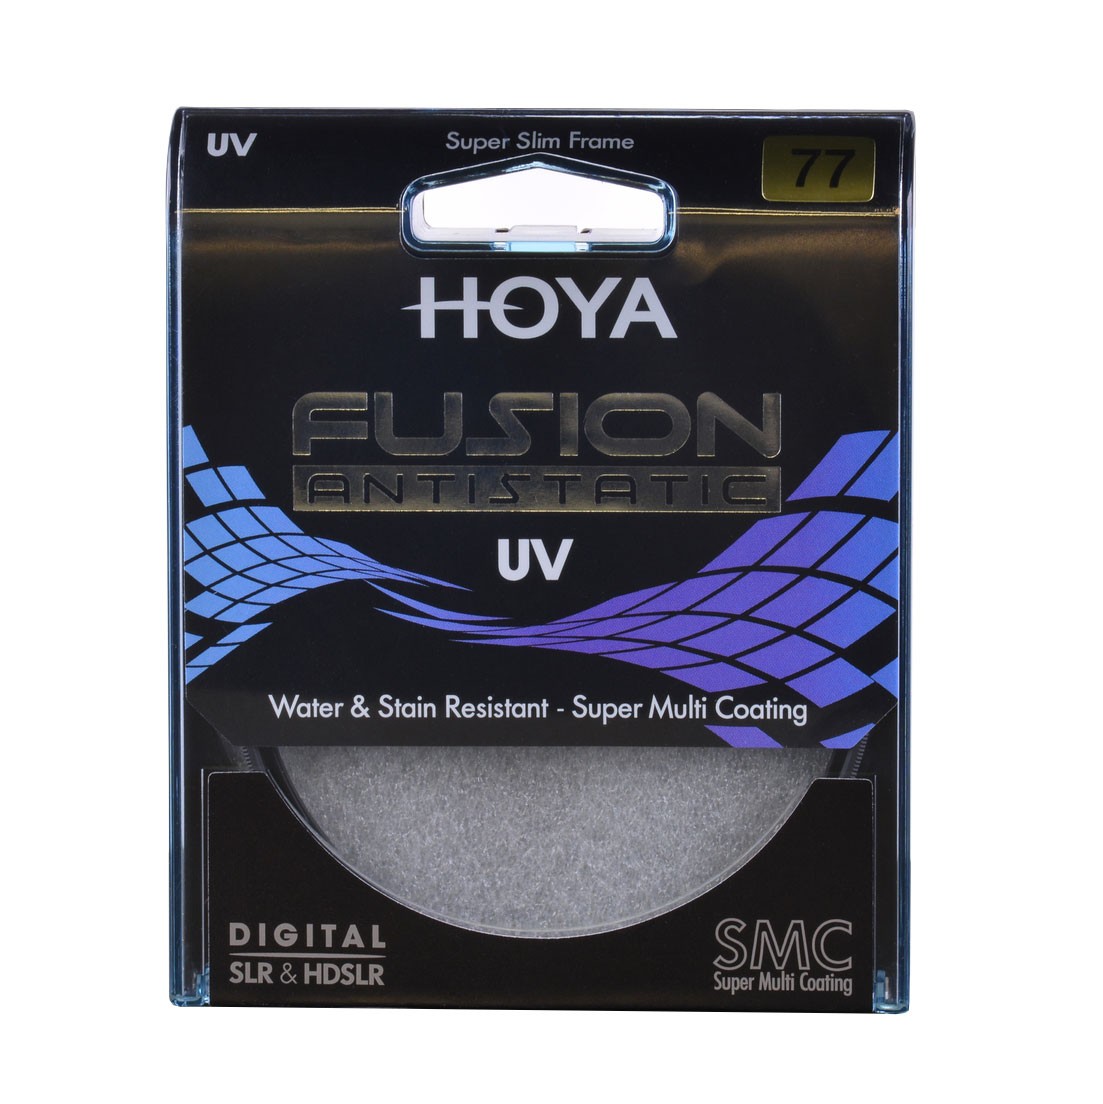 Low-Profile Filter Frame 62mm Hoya Evo Antistatic Protector Filter Dust/Stain/Water Repellent